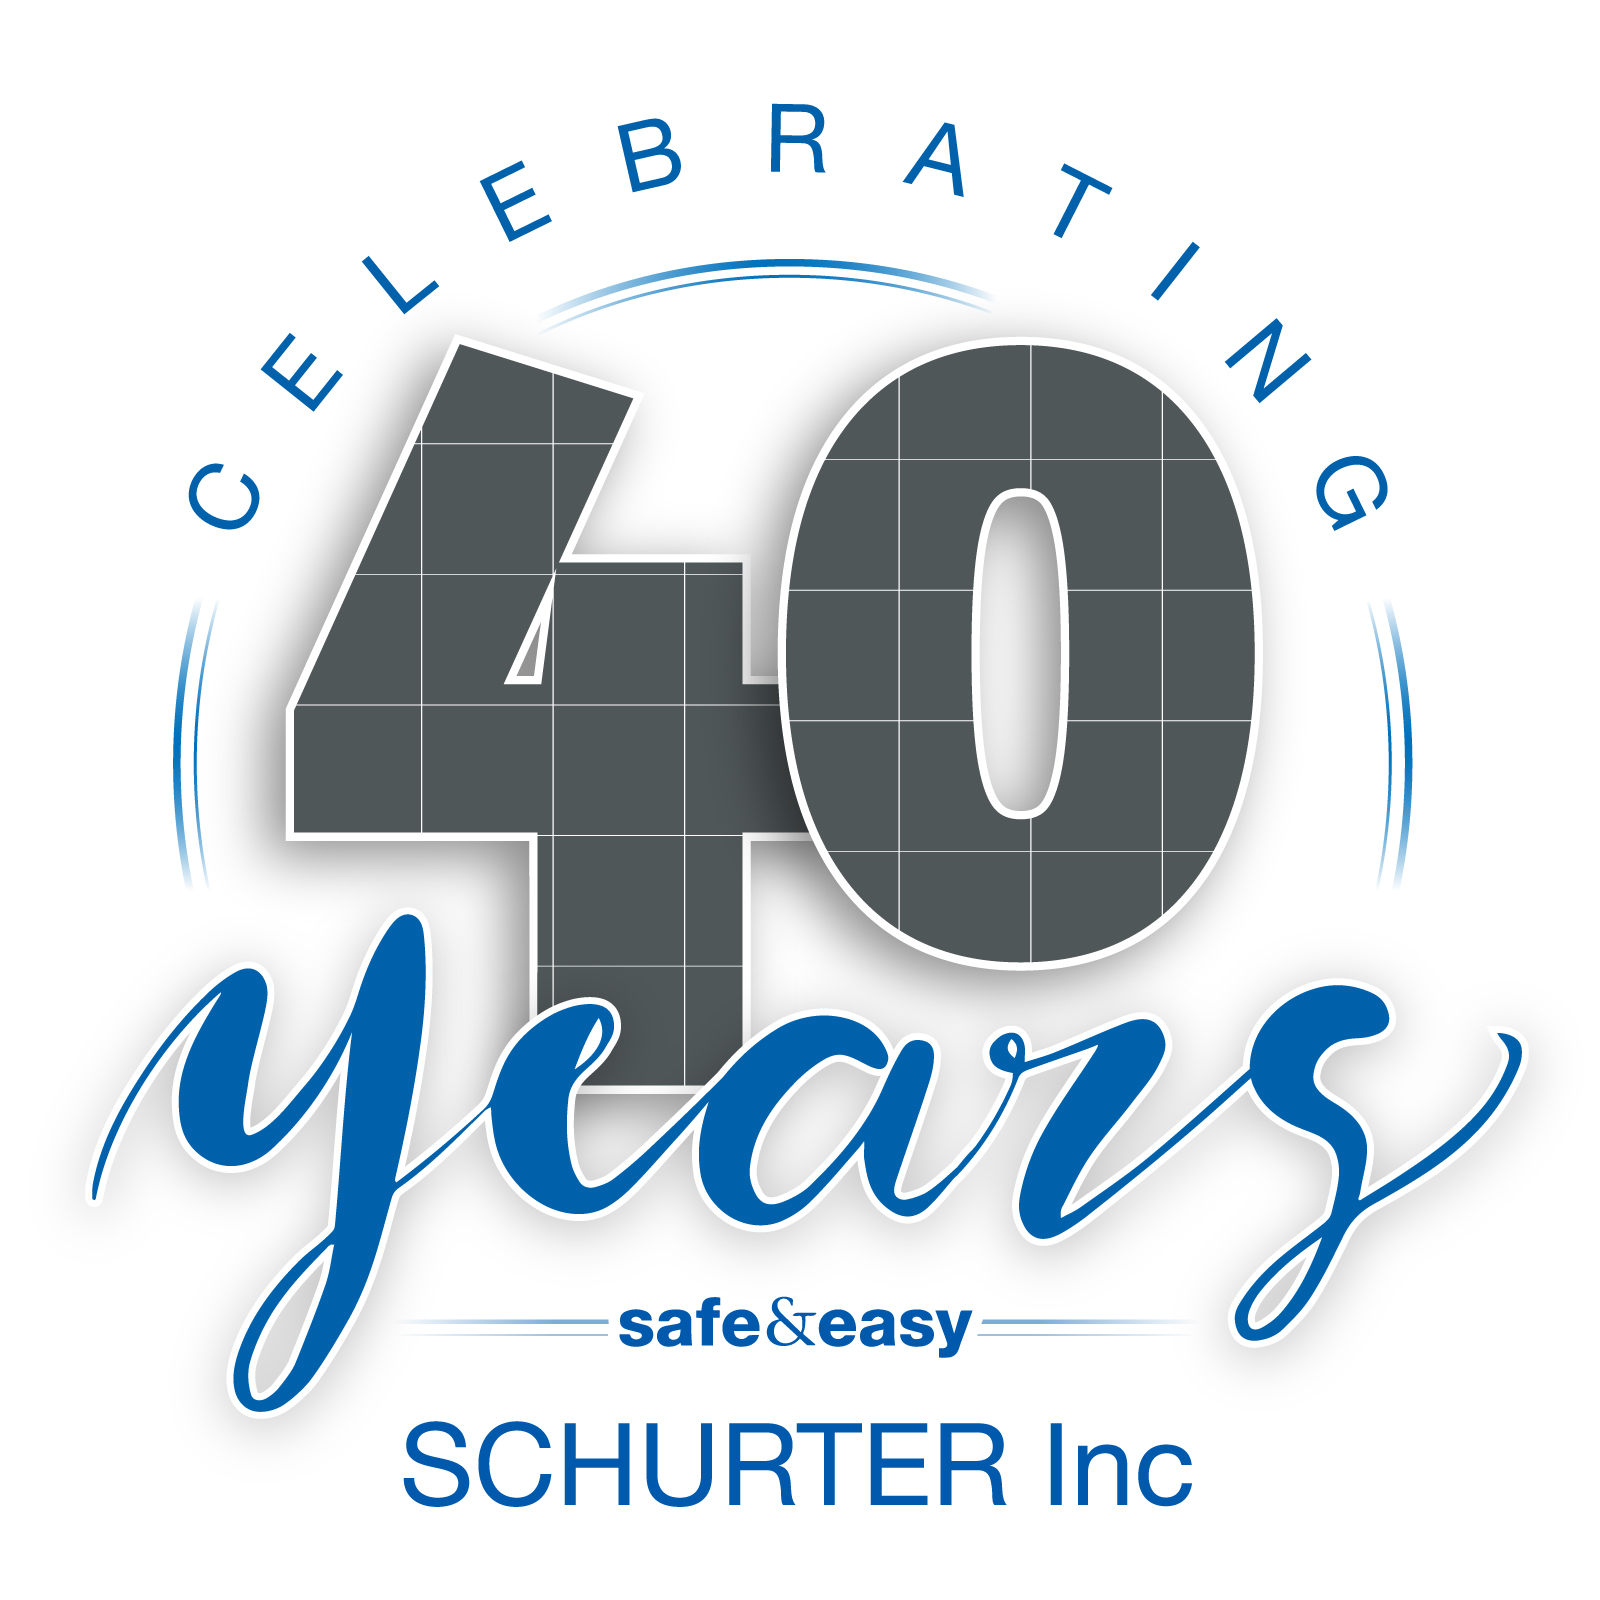 40 years of SCHURTER in the USA